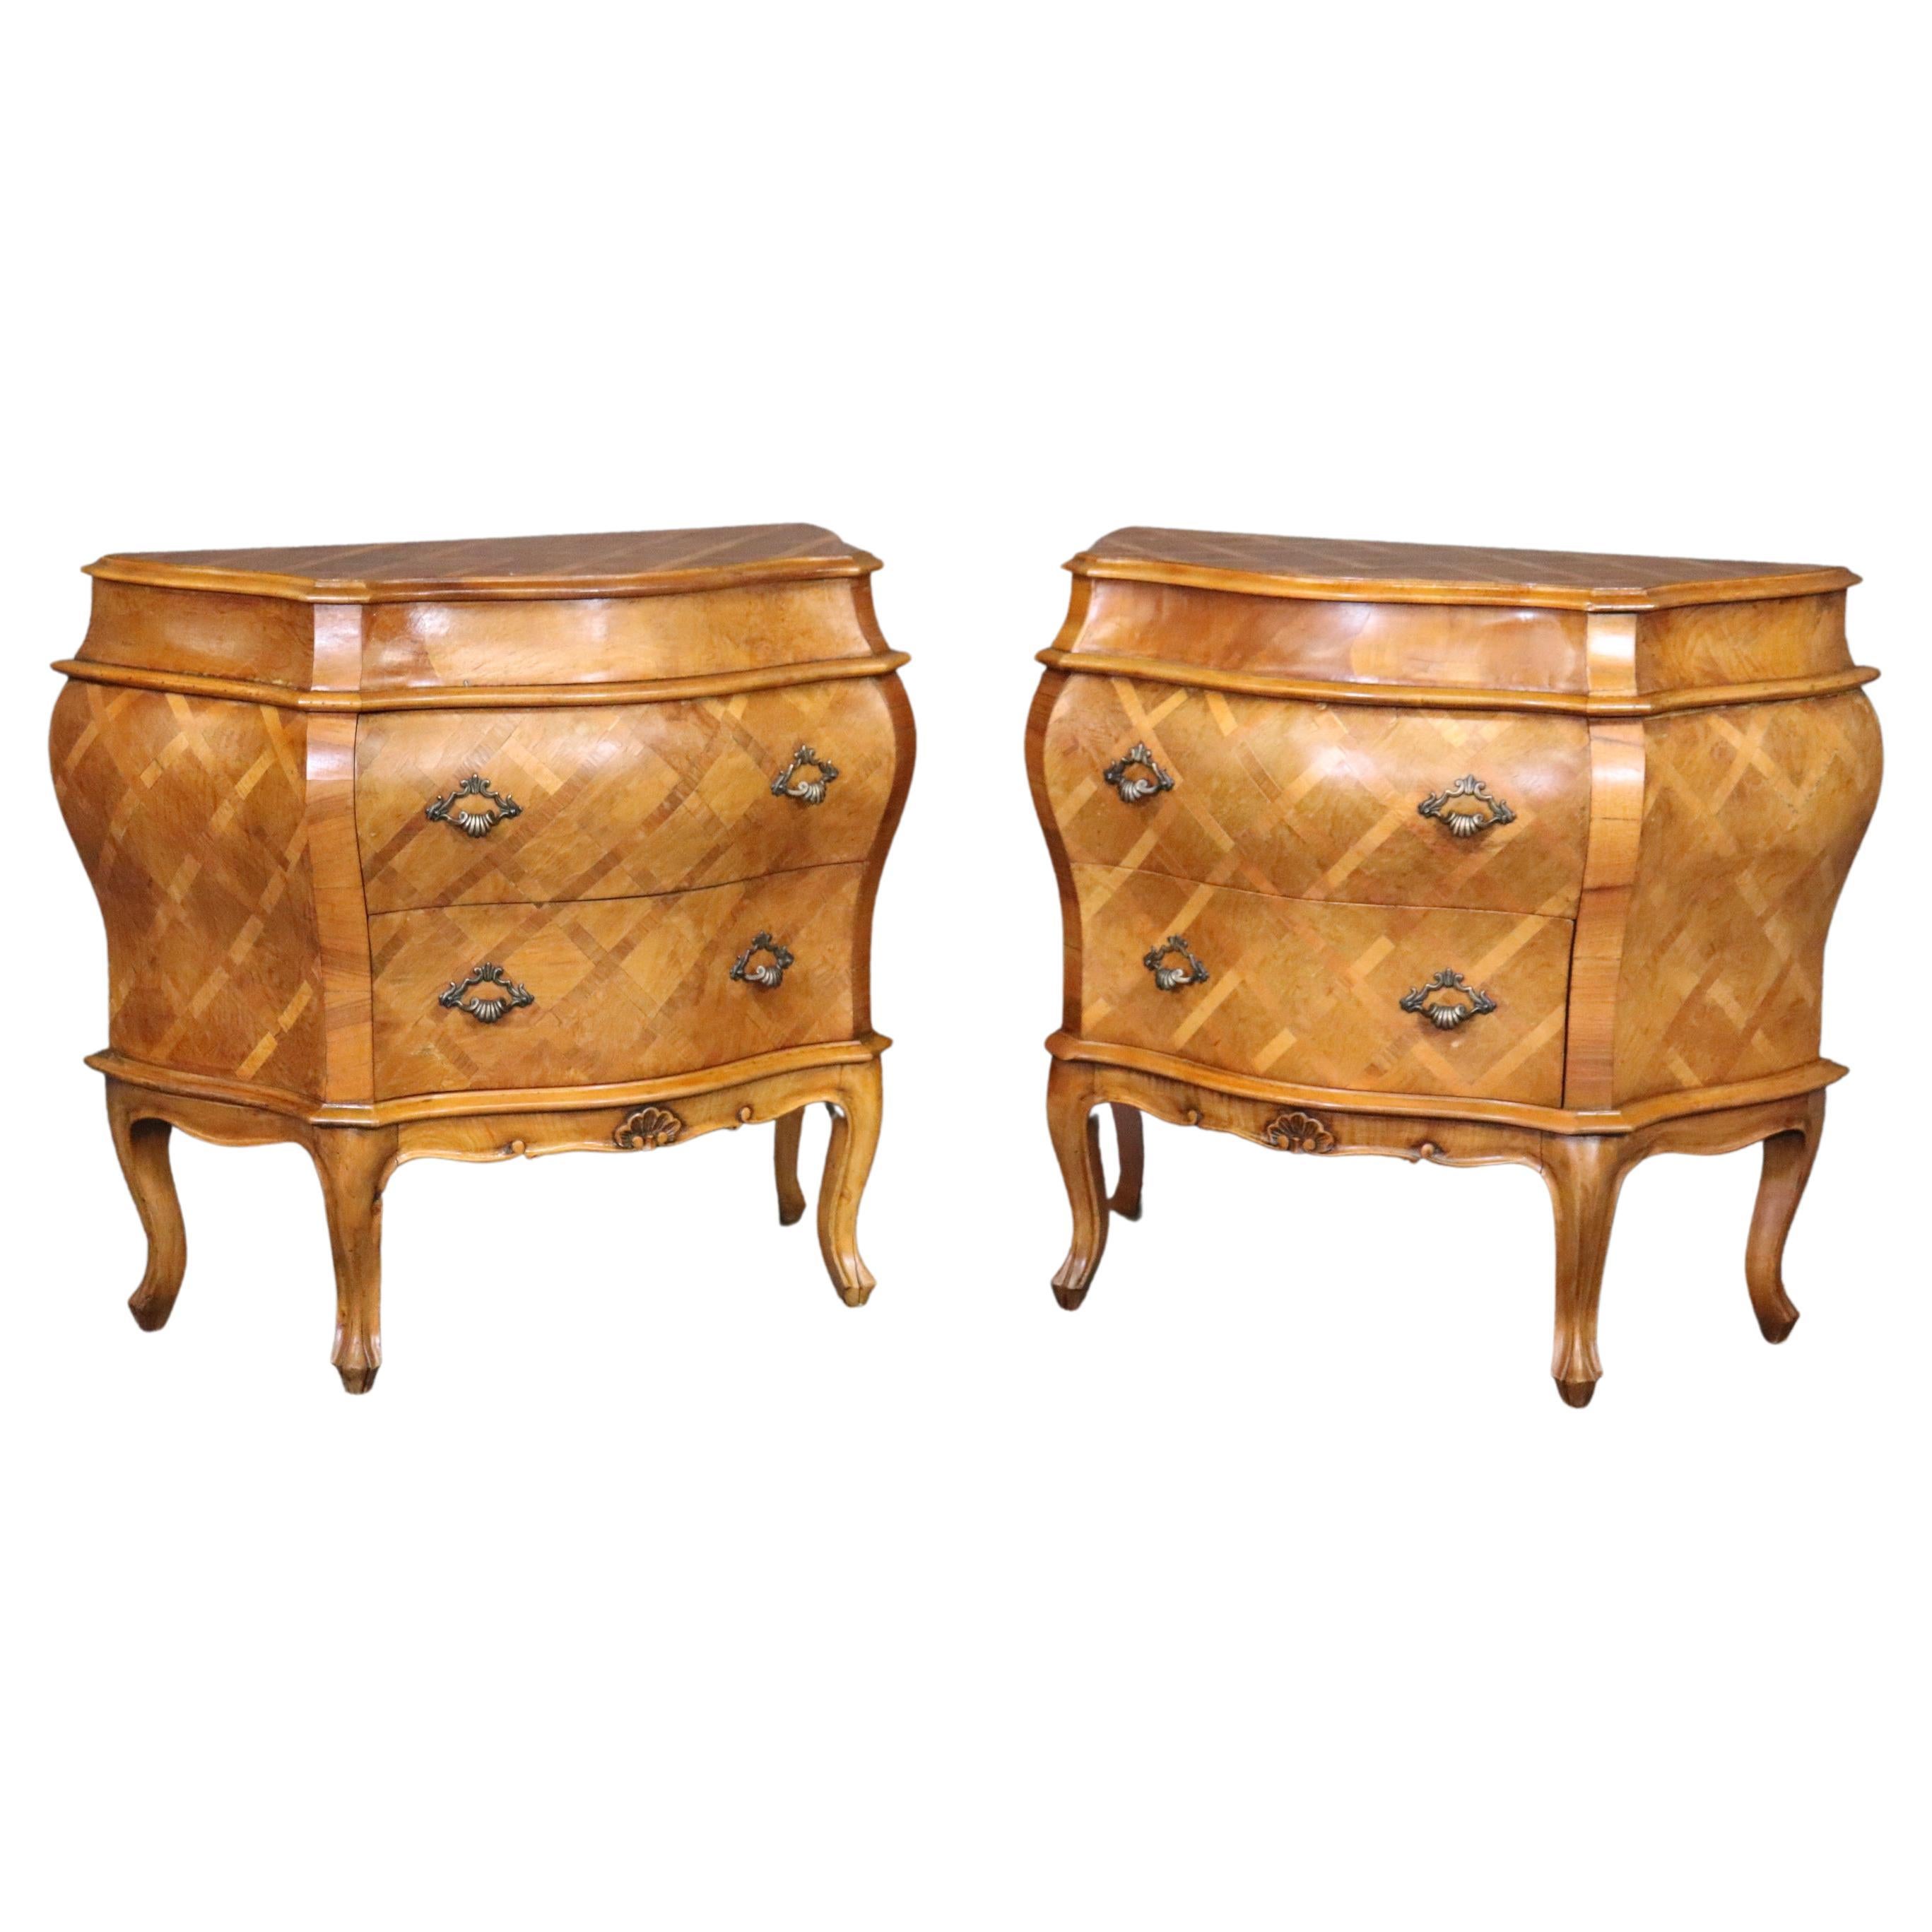 Pair of Cross-Hatch Inlaid Olivewood Italian Bombe Nightstands Endtables